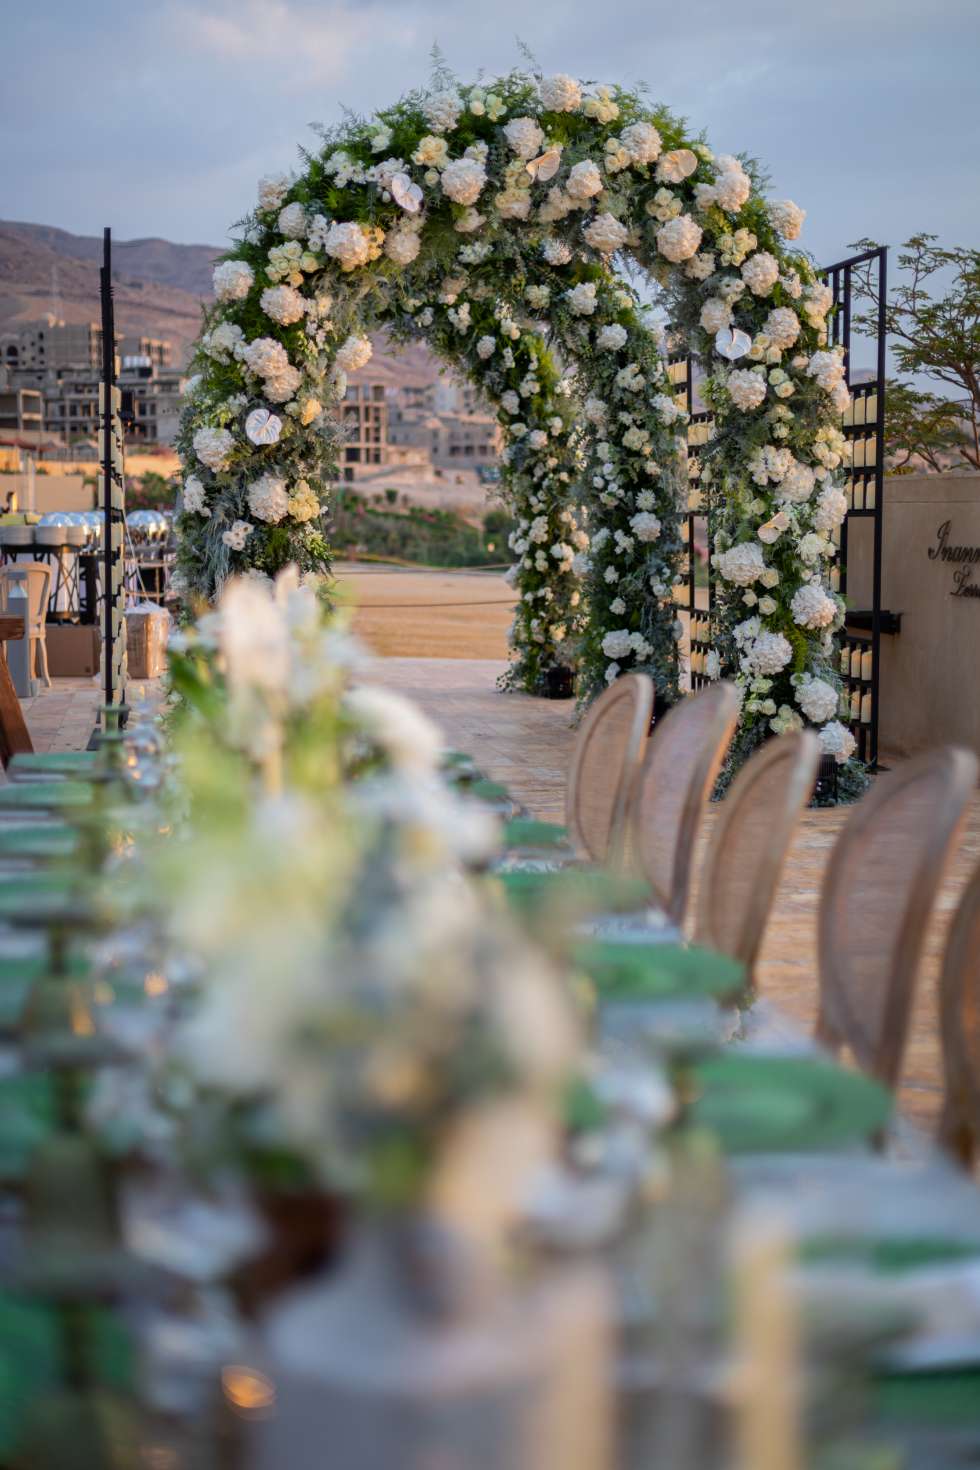 Seas The Day: A Spectacular Wedding at The Dead Sea